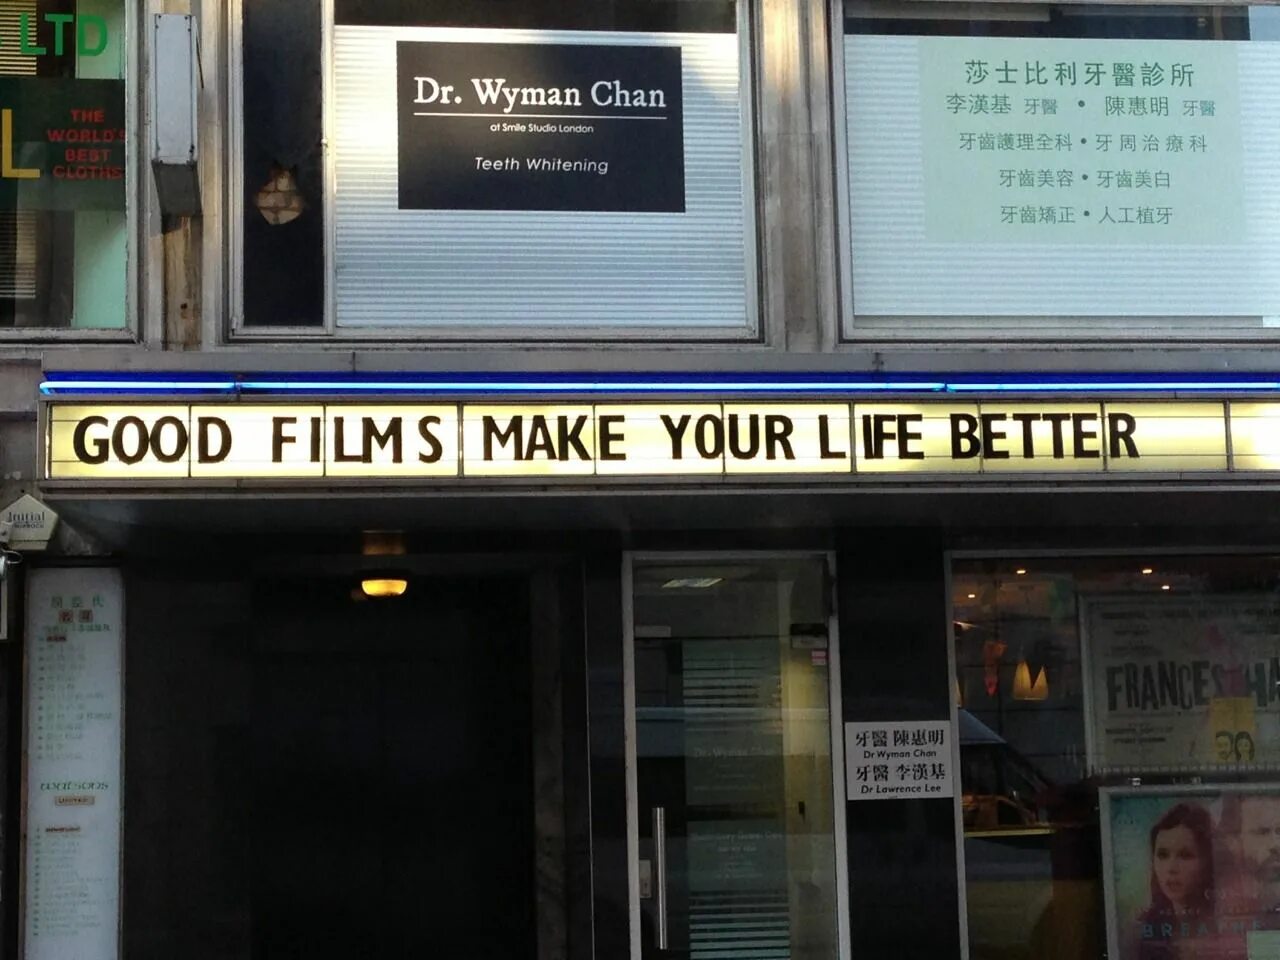 Good films. Good Life Inc. Life is better. Life good be Dream. The good life found